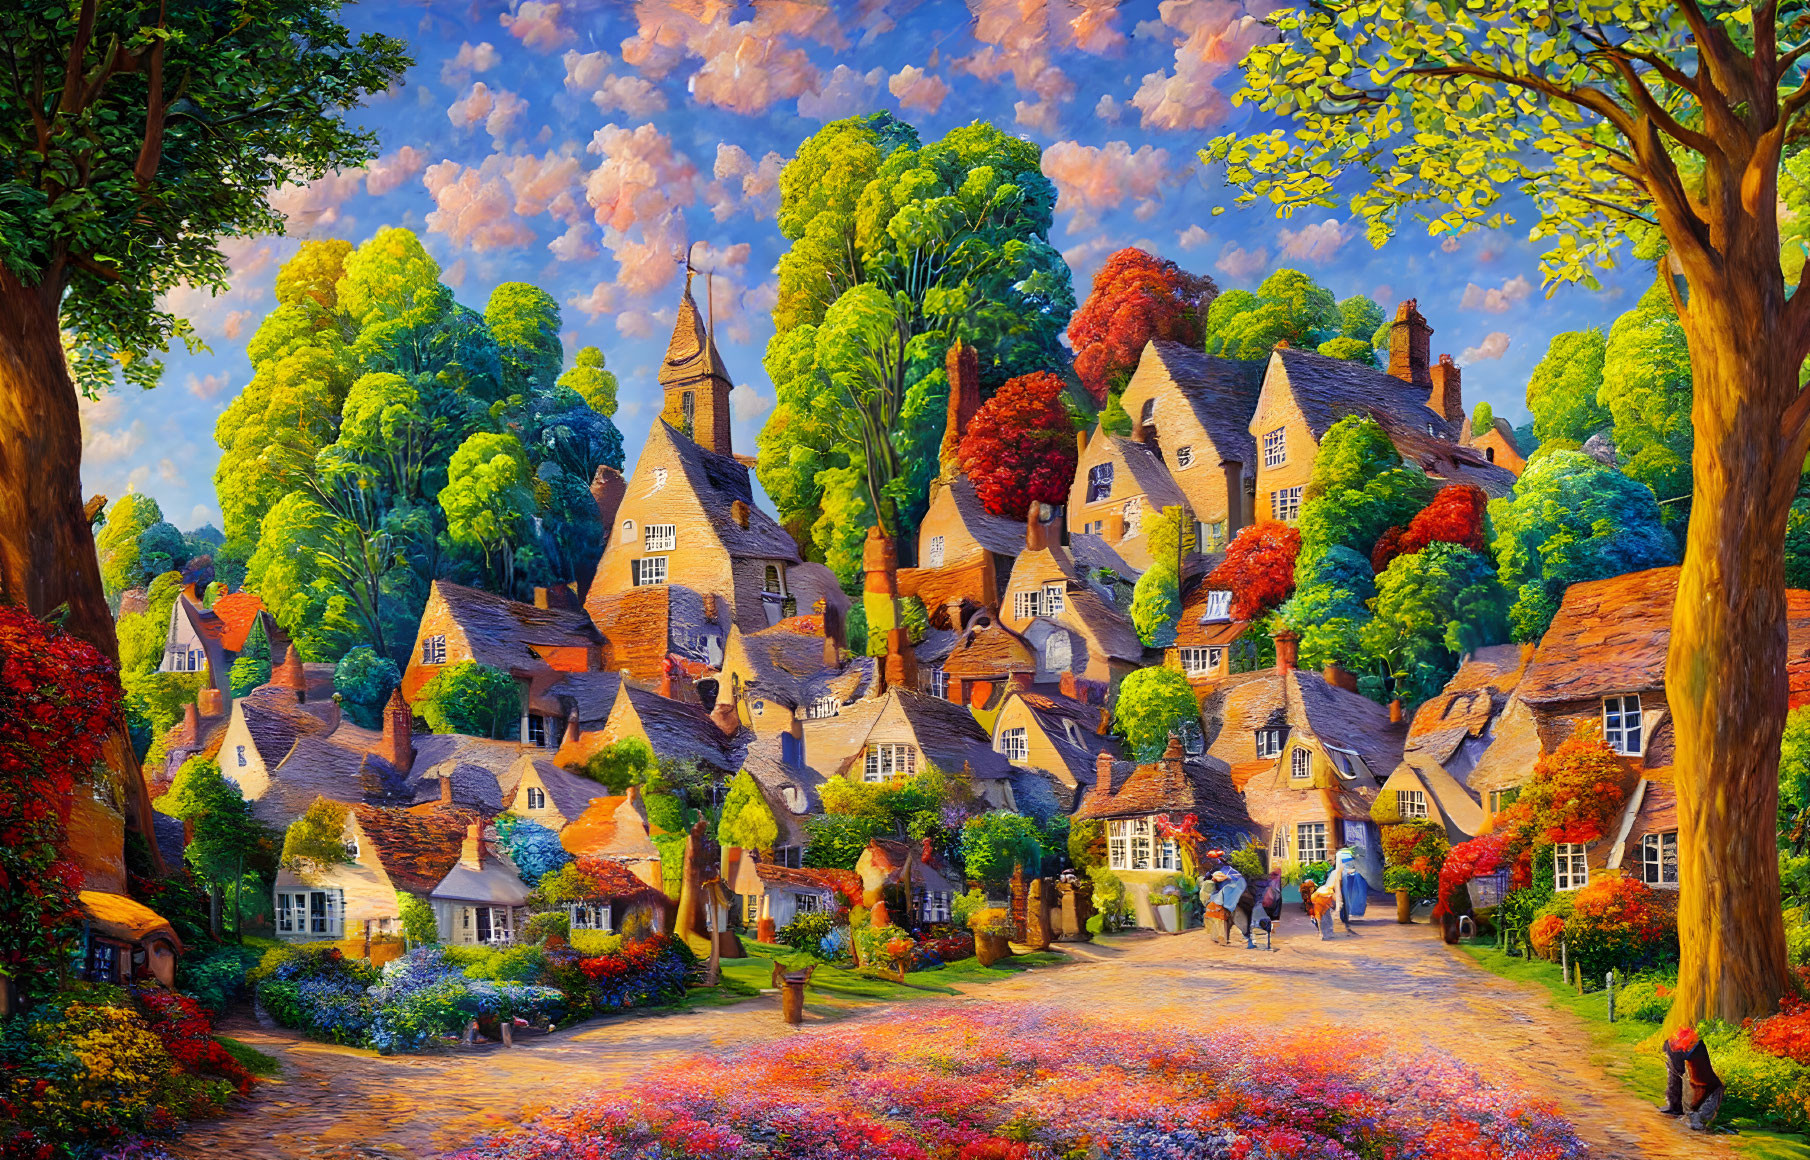 Scenic painting of quaint village with thatched-roof cottages and blooming flowers